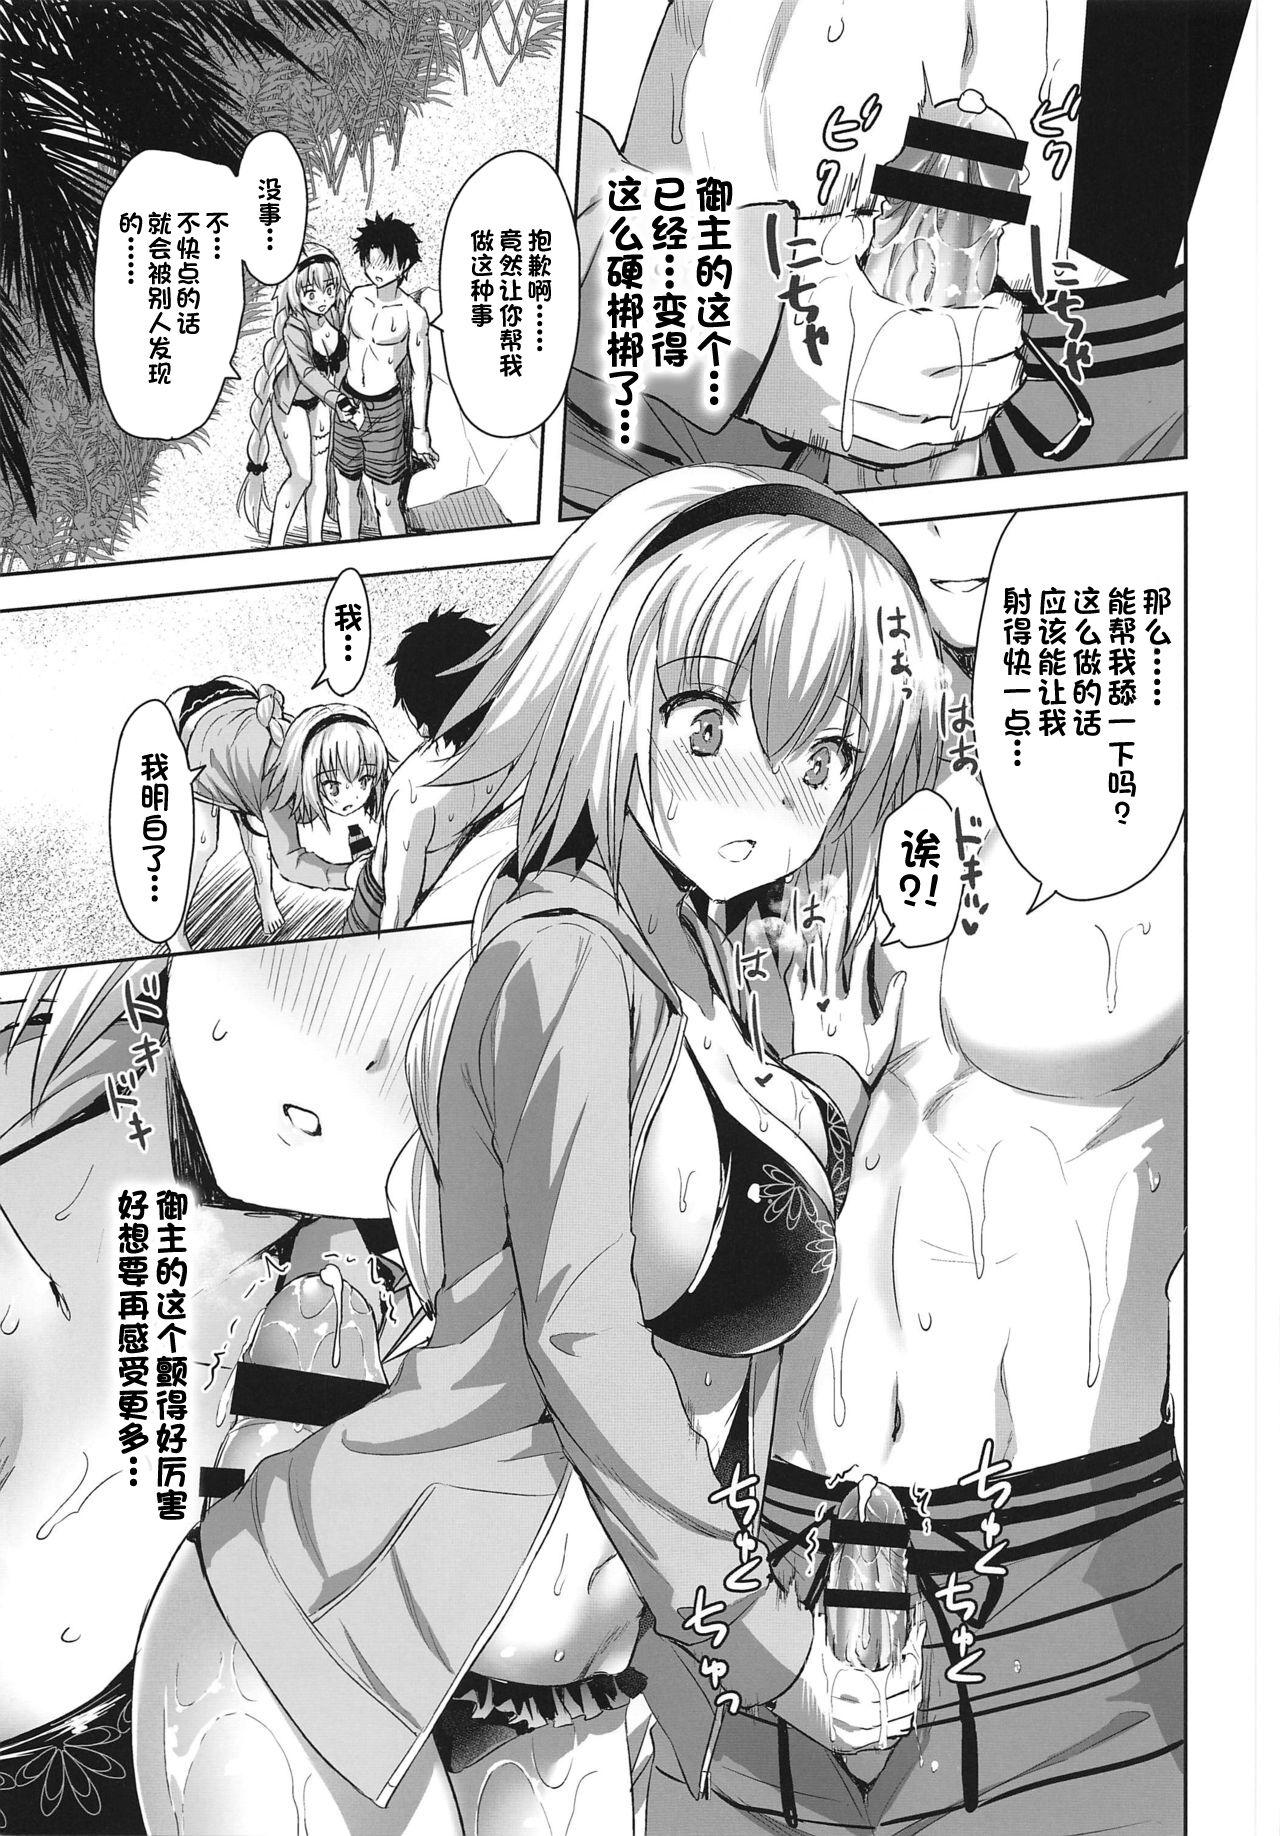 Cheating Wife Jeanne in Summer - Fate grand order Follada - Page 6